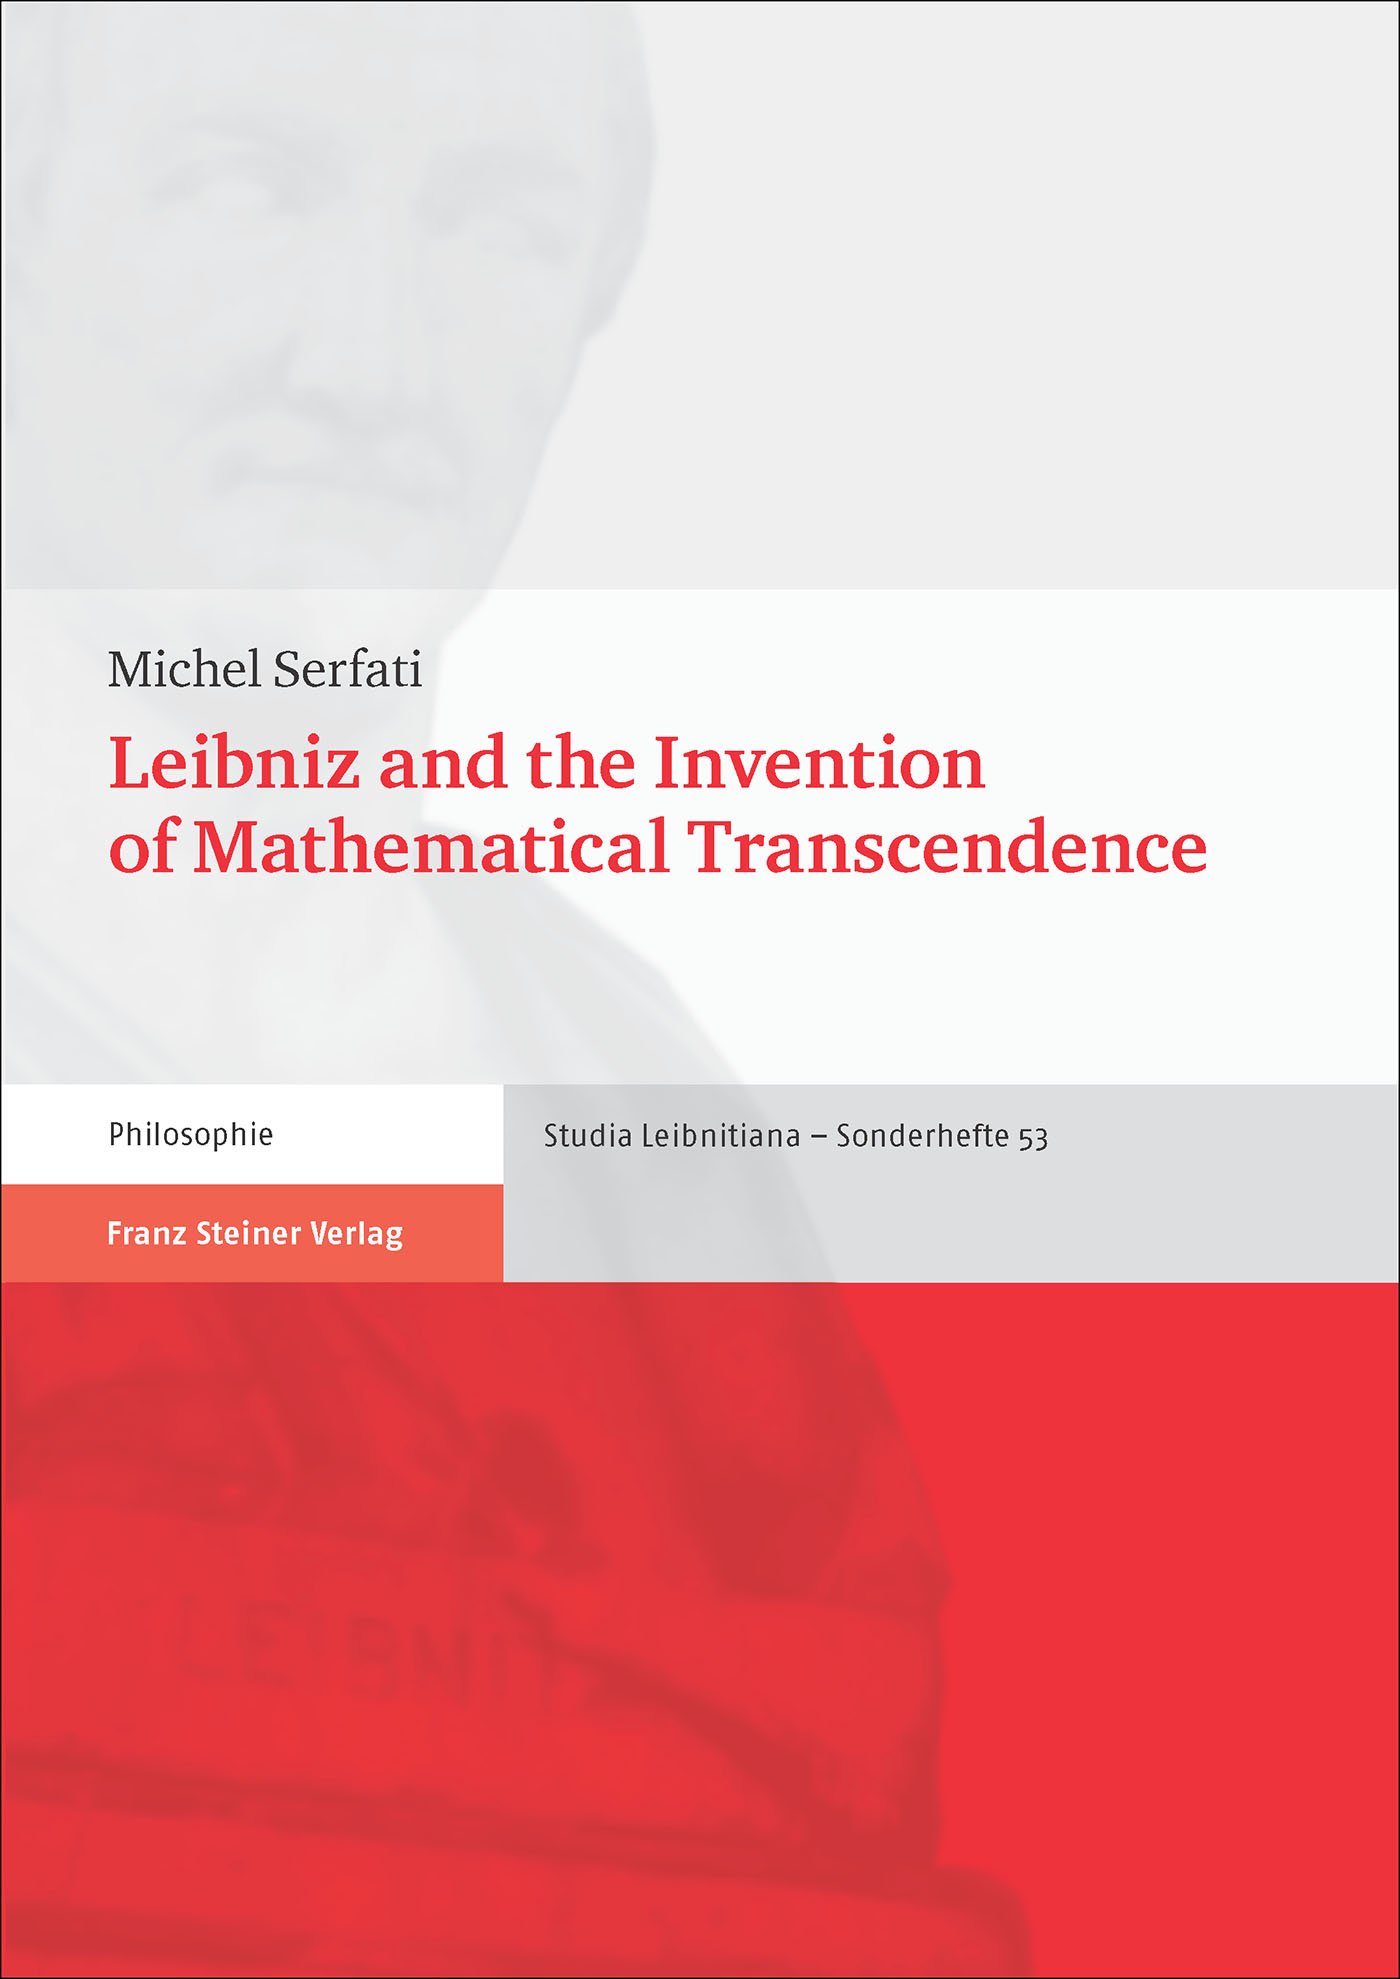 Leibniz and the Invention of Mathematical Transcendence